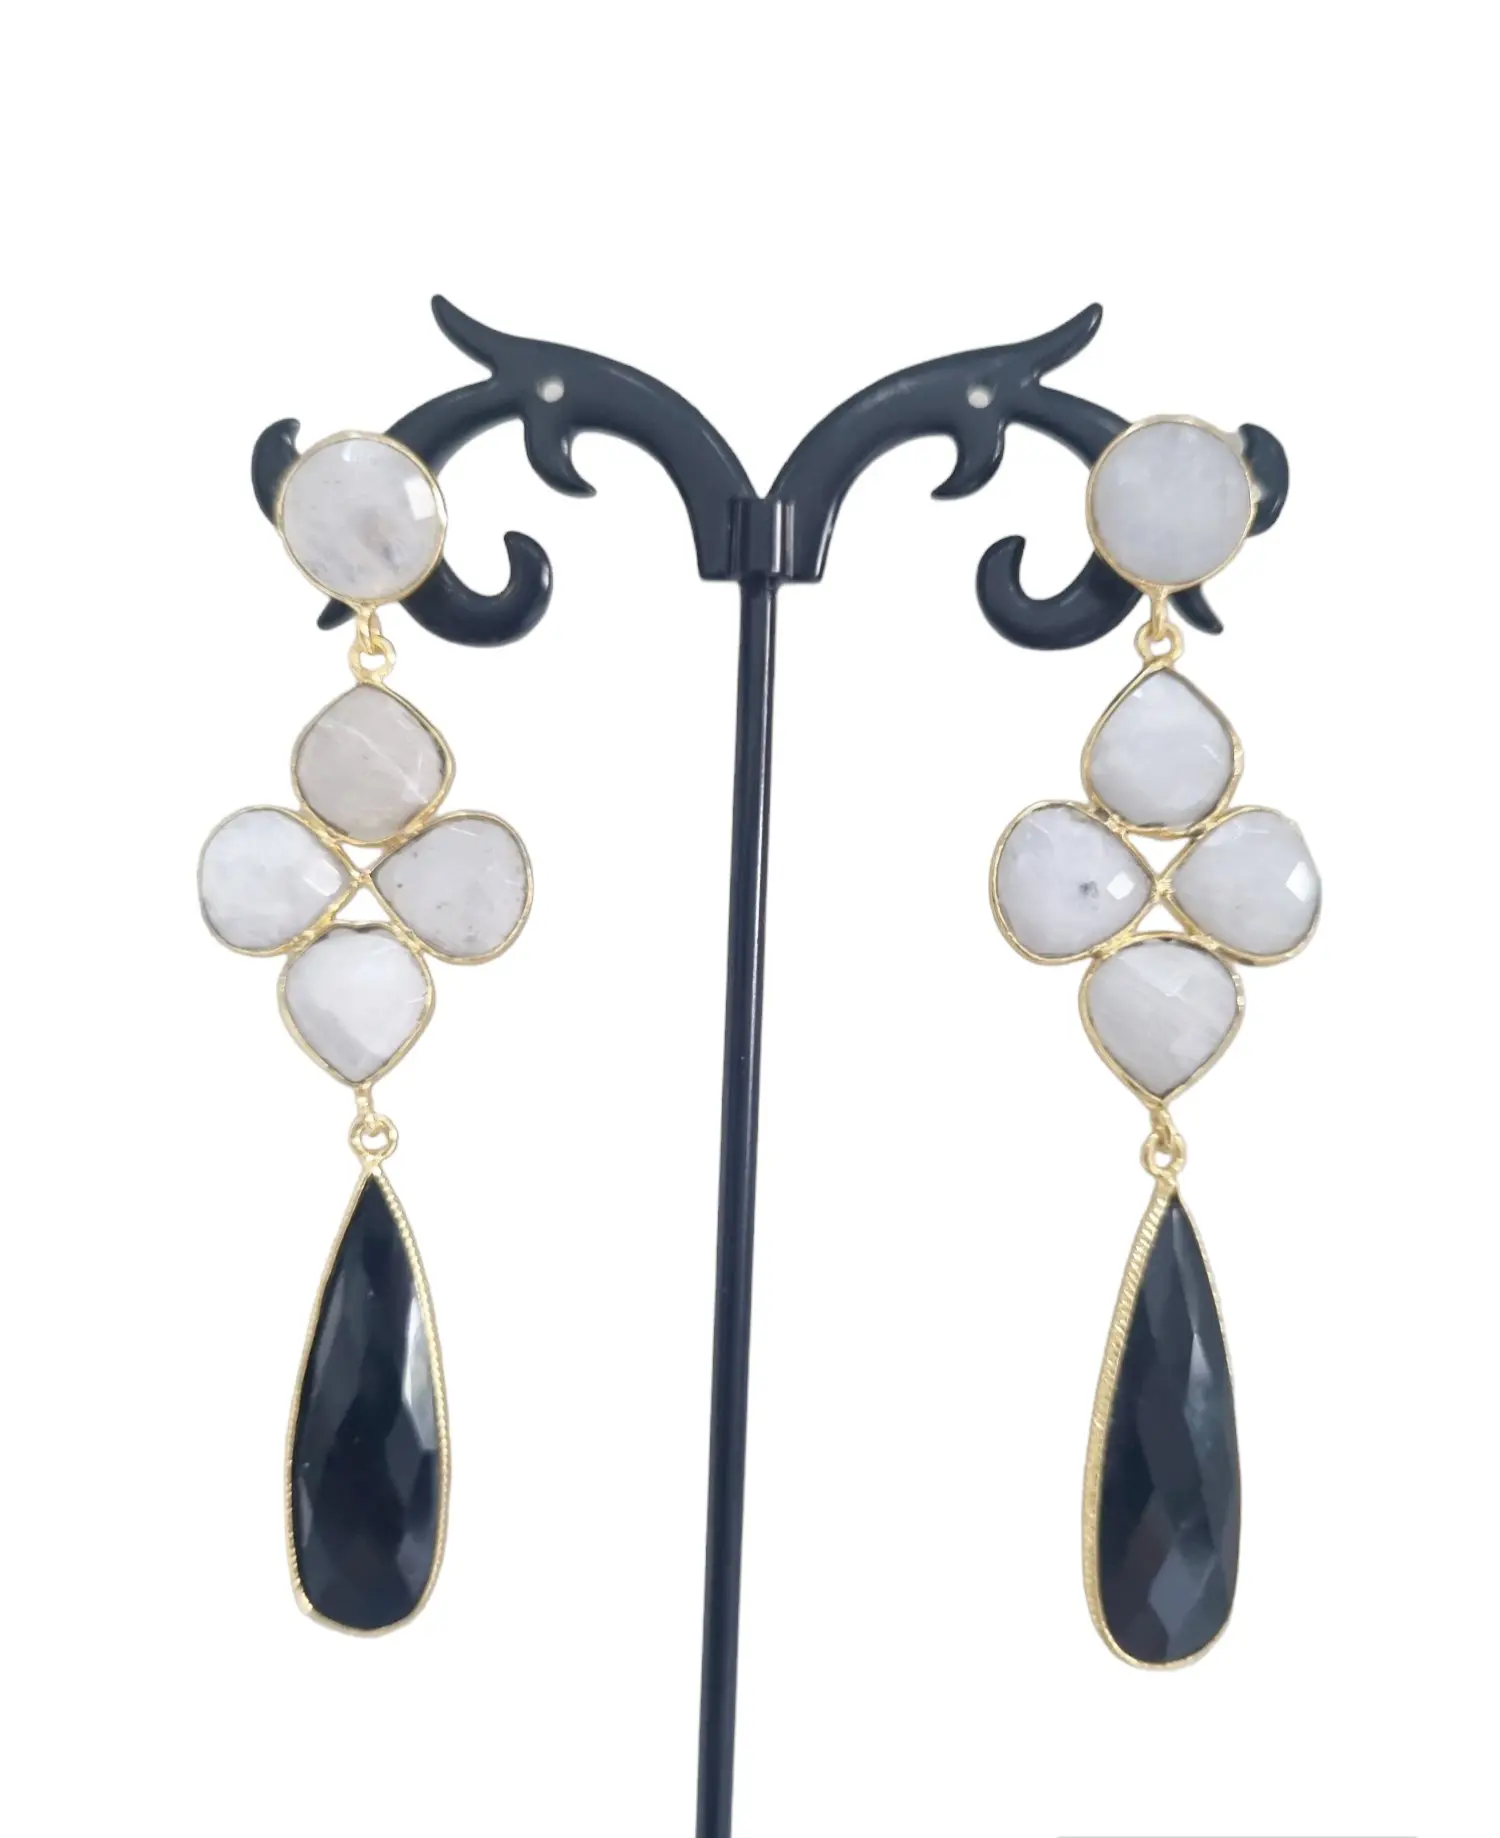 Earrings made with onyx and moonstone surrounded by brass. Length 7.5cm Weight 6.9gr